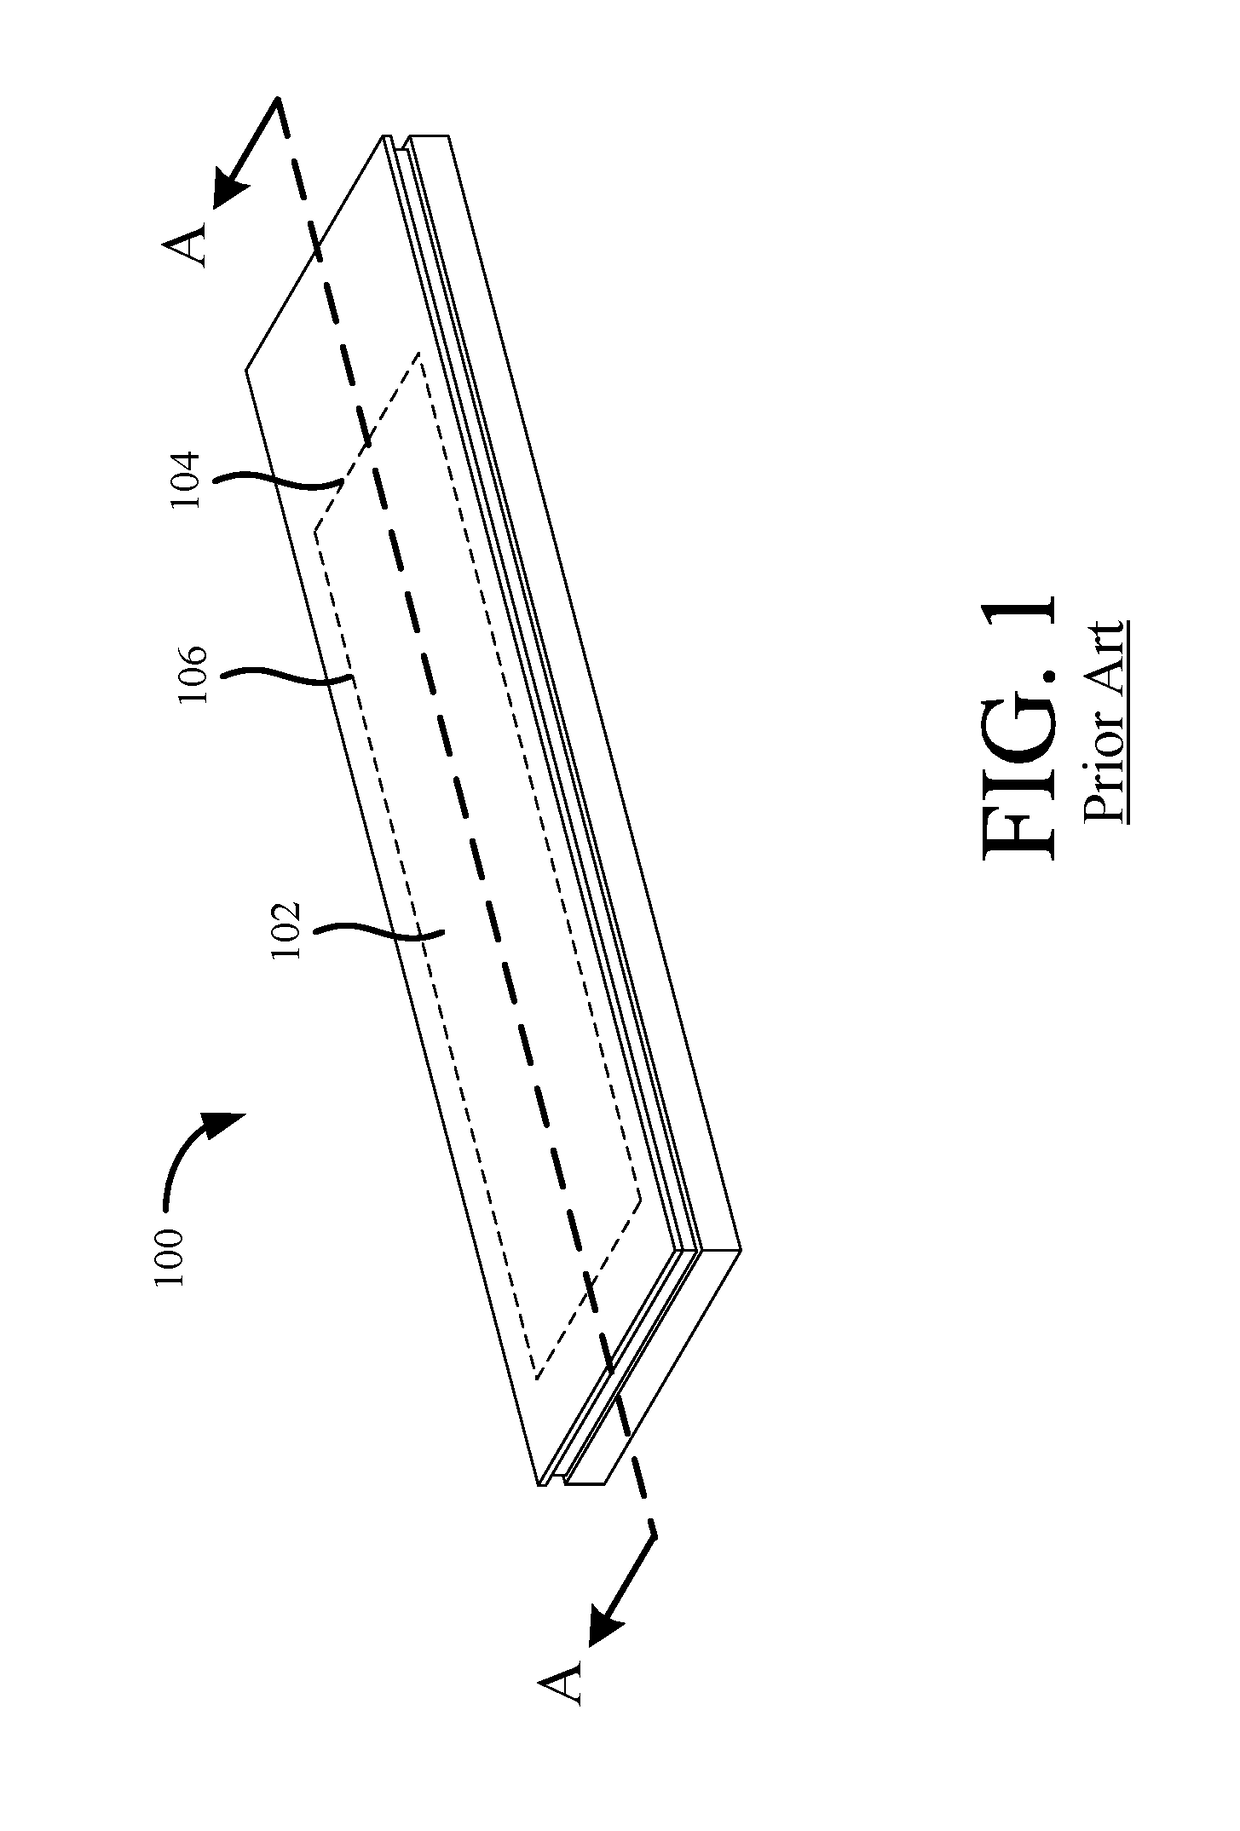 Liquid Crystal Display Device With Peripheral Electrode